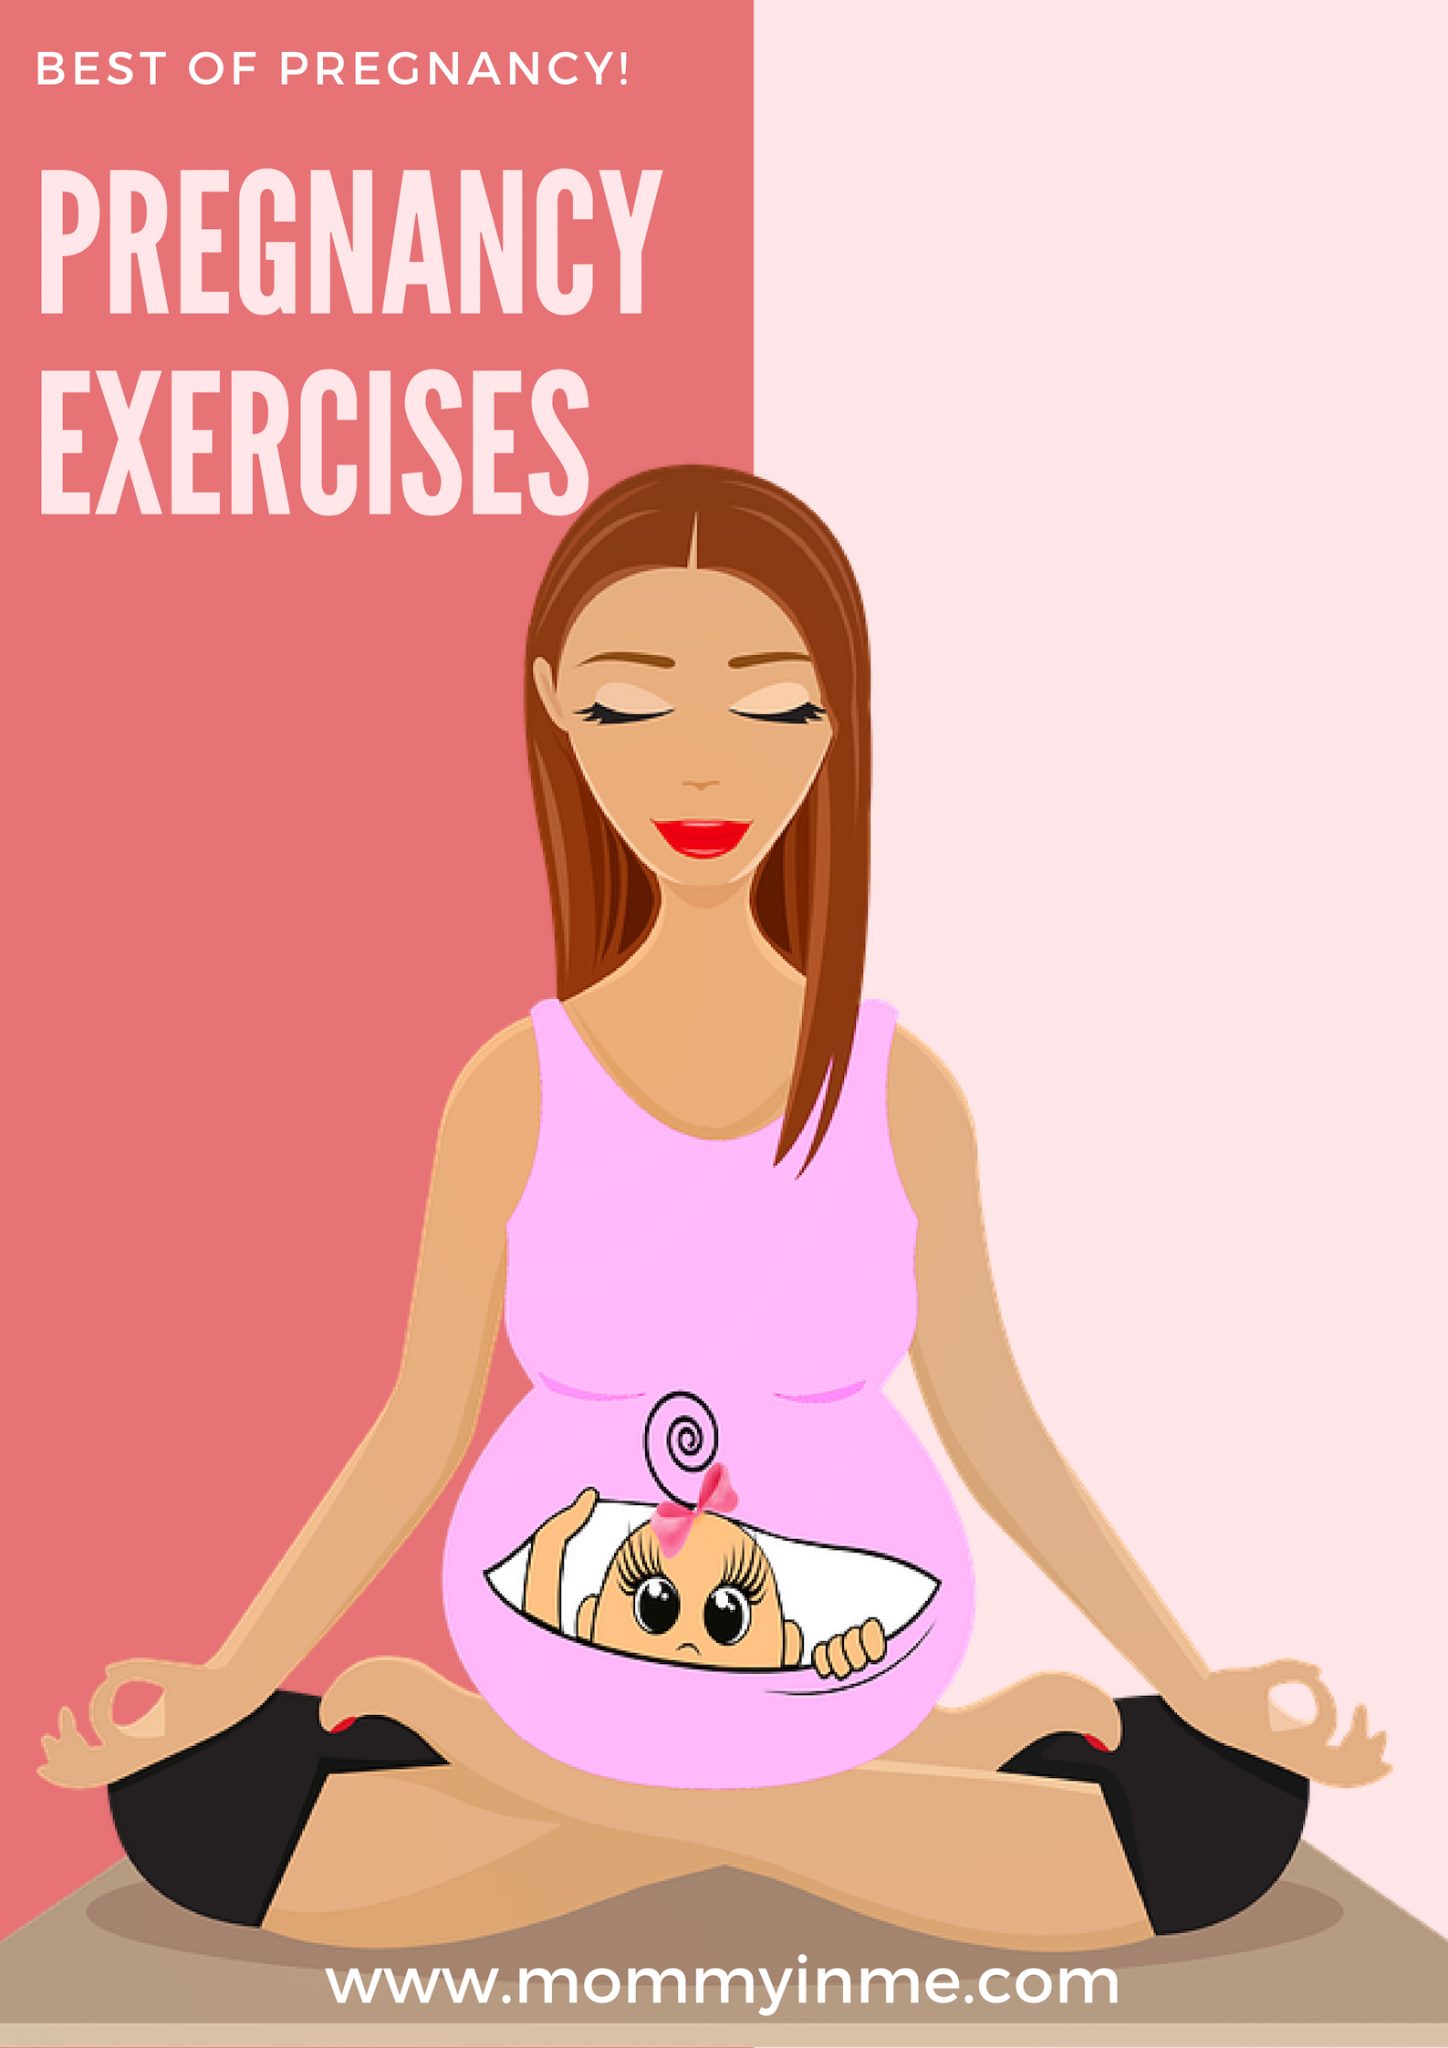 Exercise is highly beneficial during pregnancy, not only for your own health but also for your unborn baby. Read to know best exercises during pregnancy. #pregnancyexercise #pregnancy #pregnant #exercise #squats #swimming #dancing